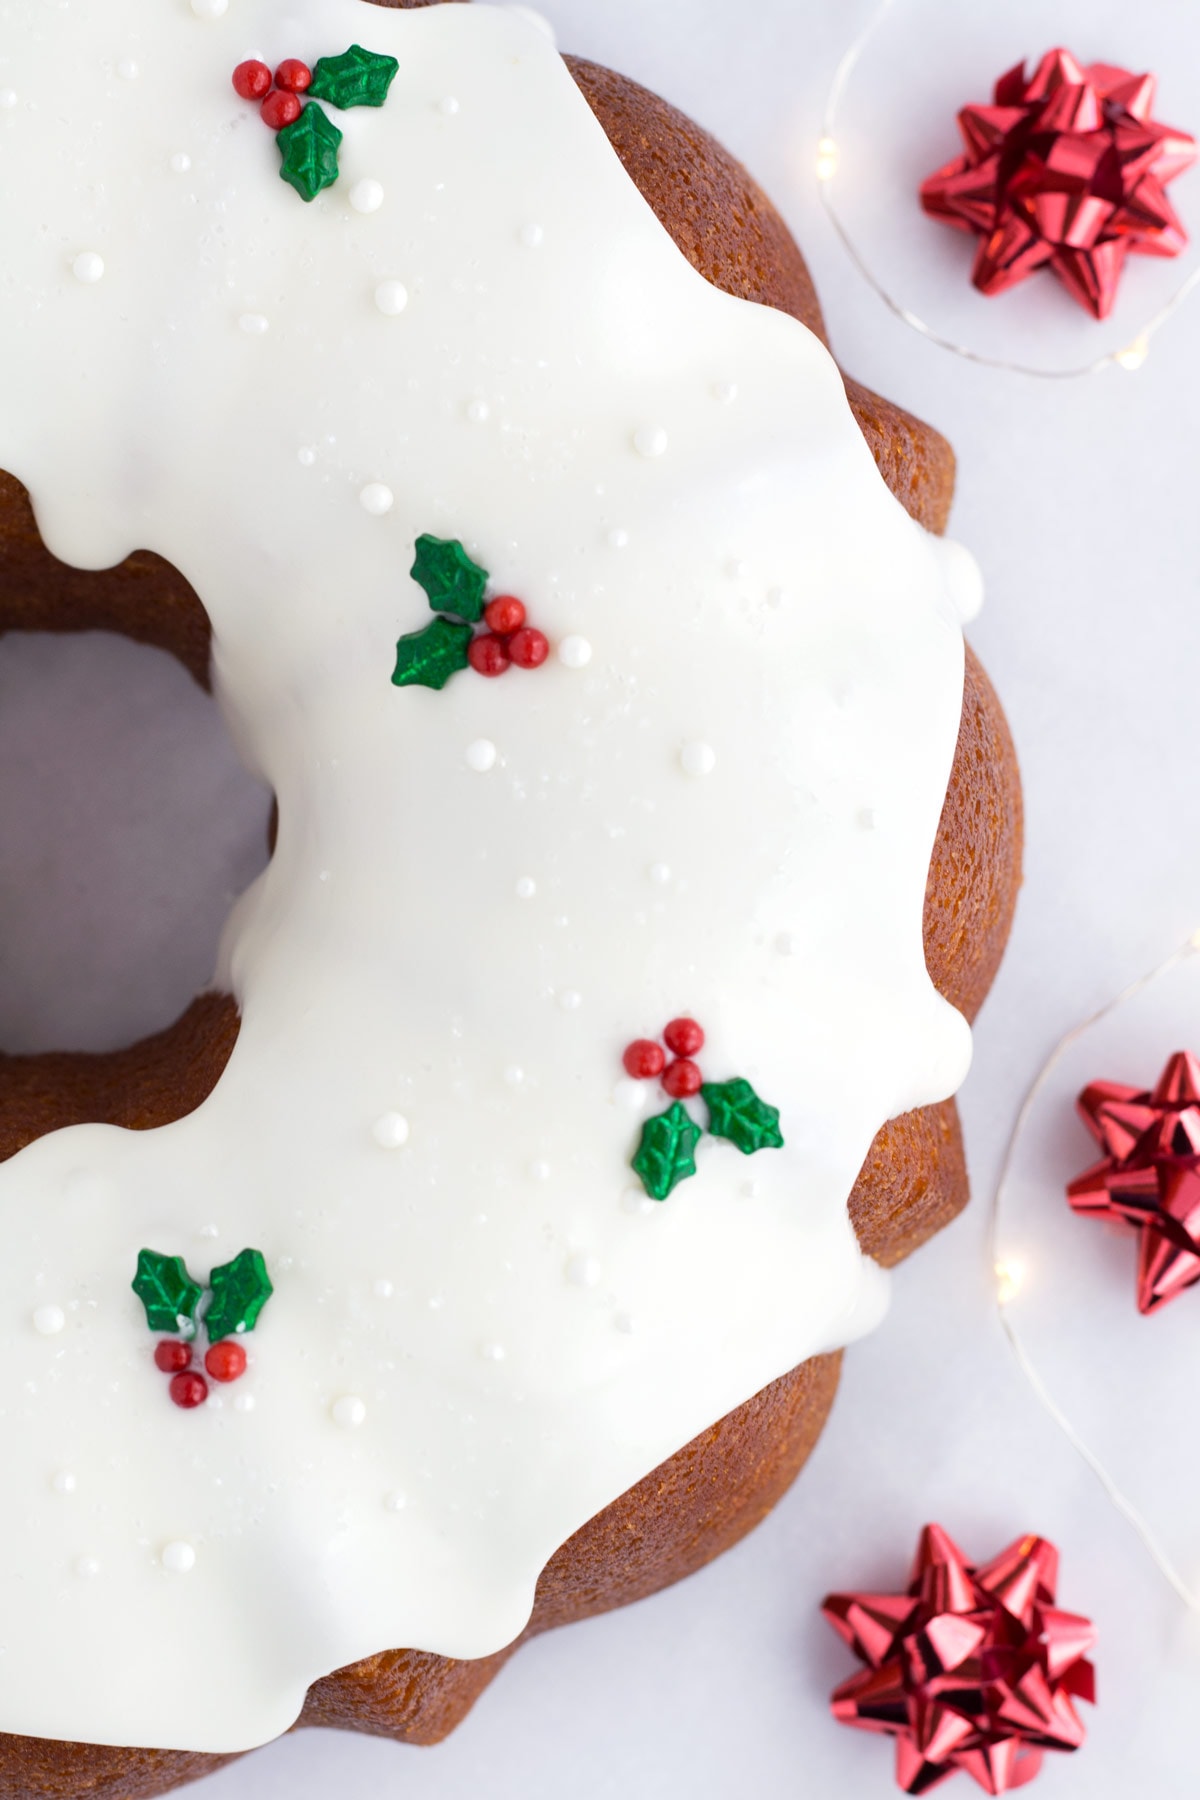 Shimmery sprinkles and holly and berry candies on a Christmas Bundt cake.